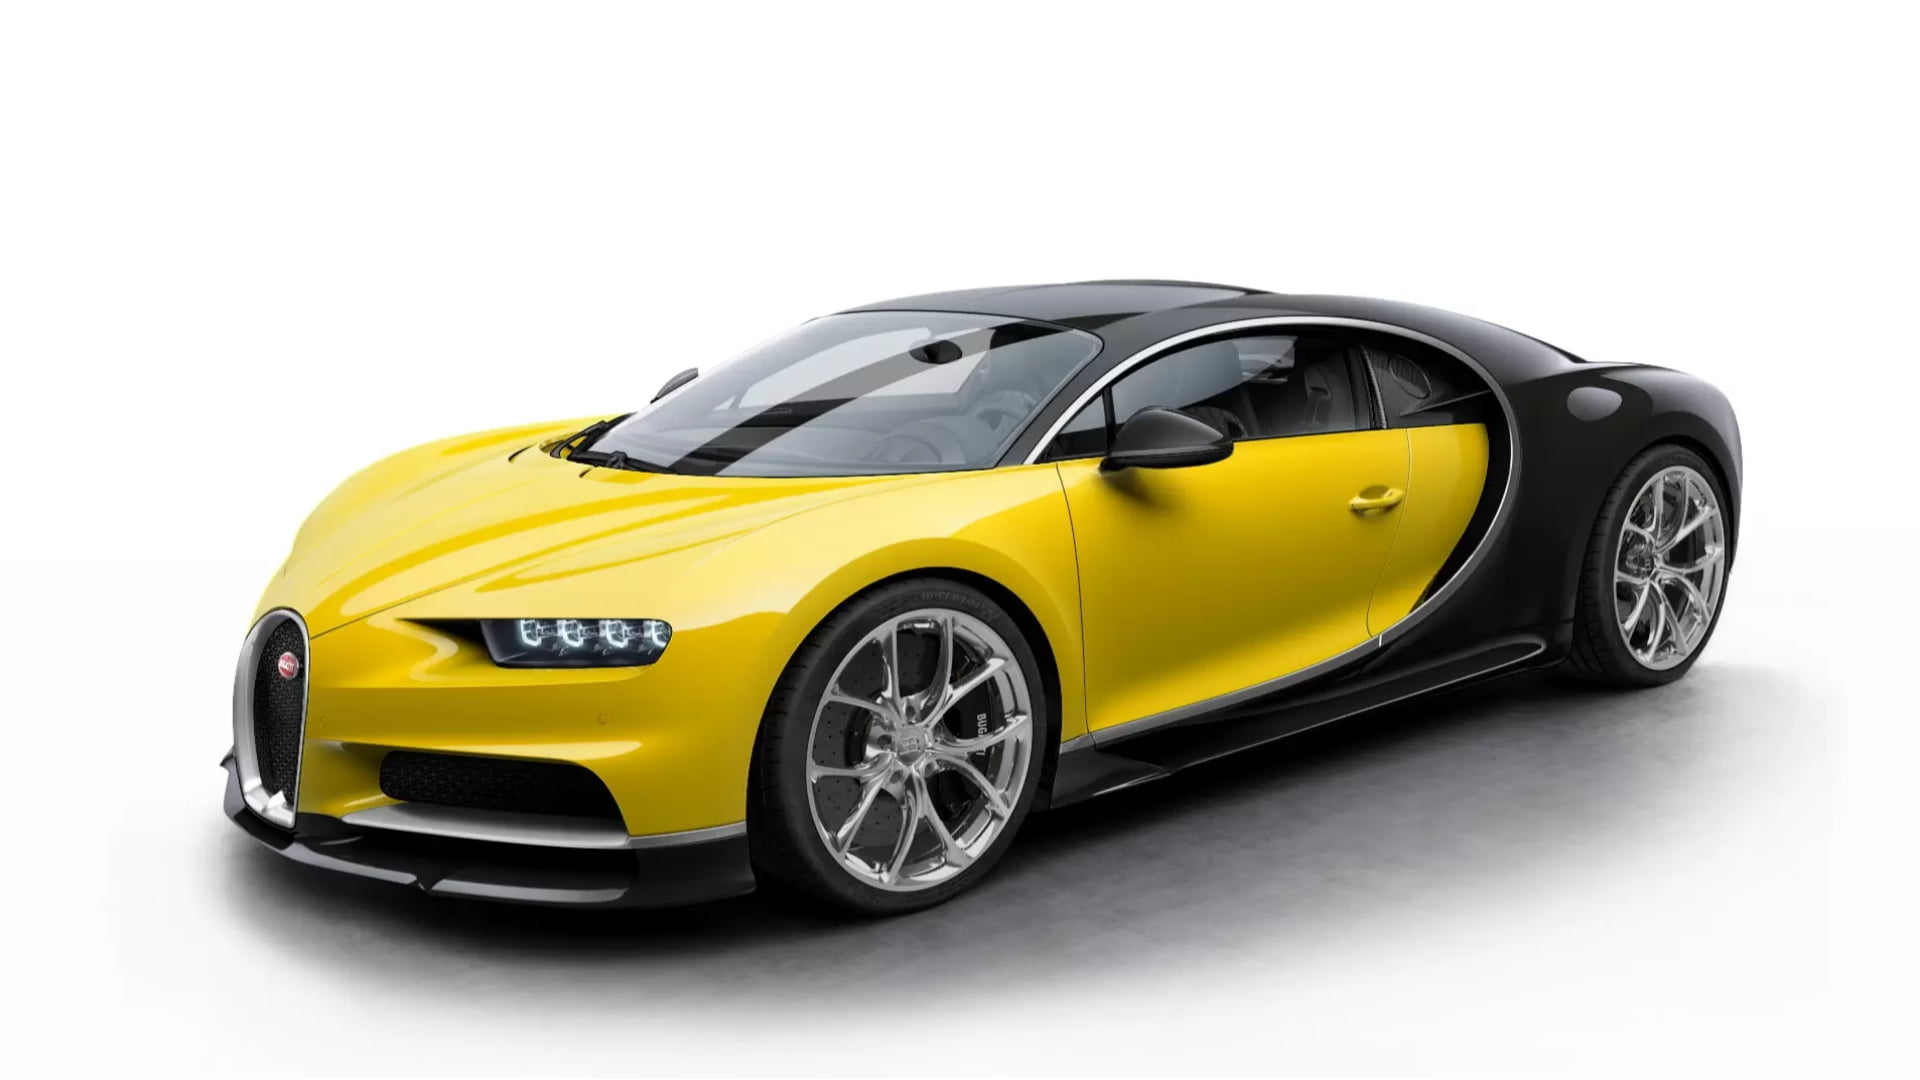 Bugatti Chiron new yellow & black is the fastest car in the world